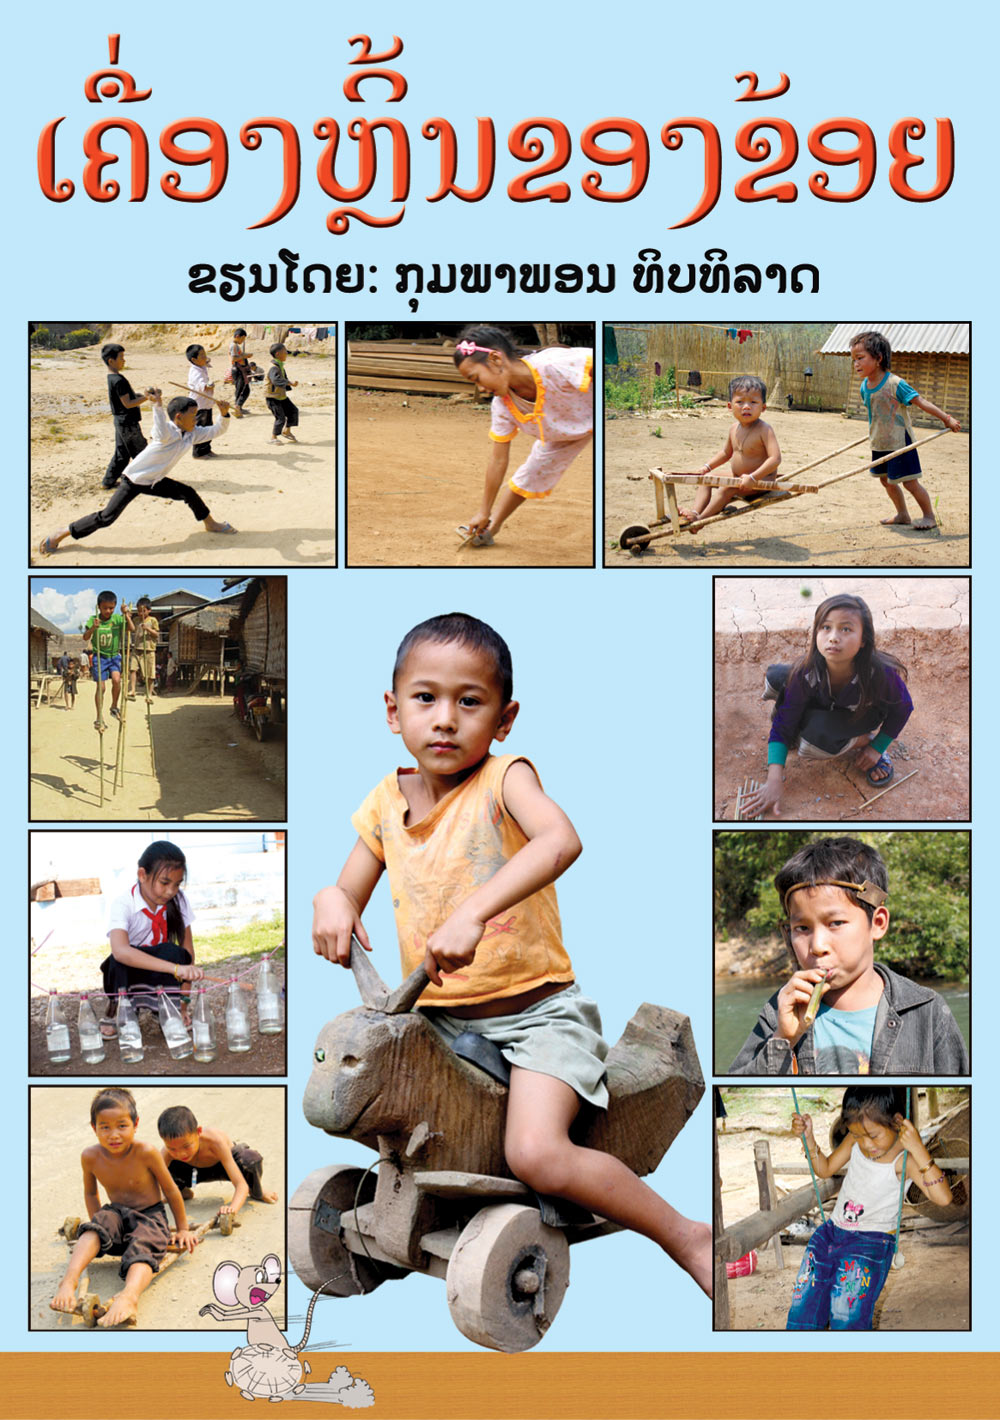 Our Toys large book cover, published in Lao language